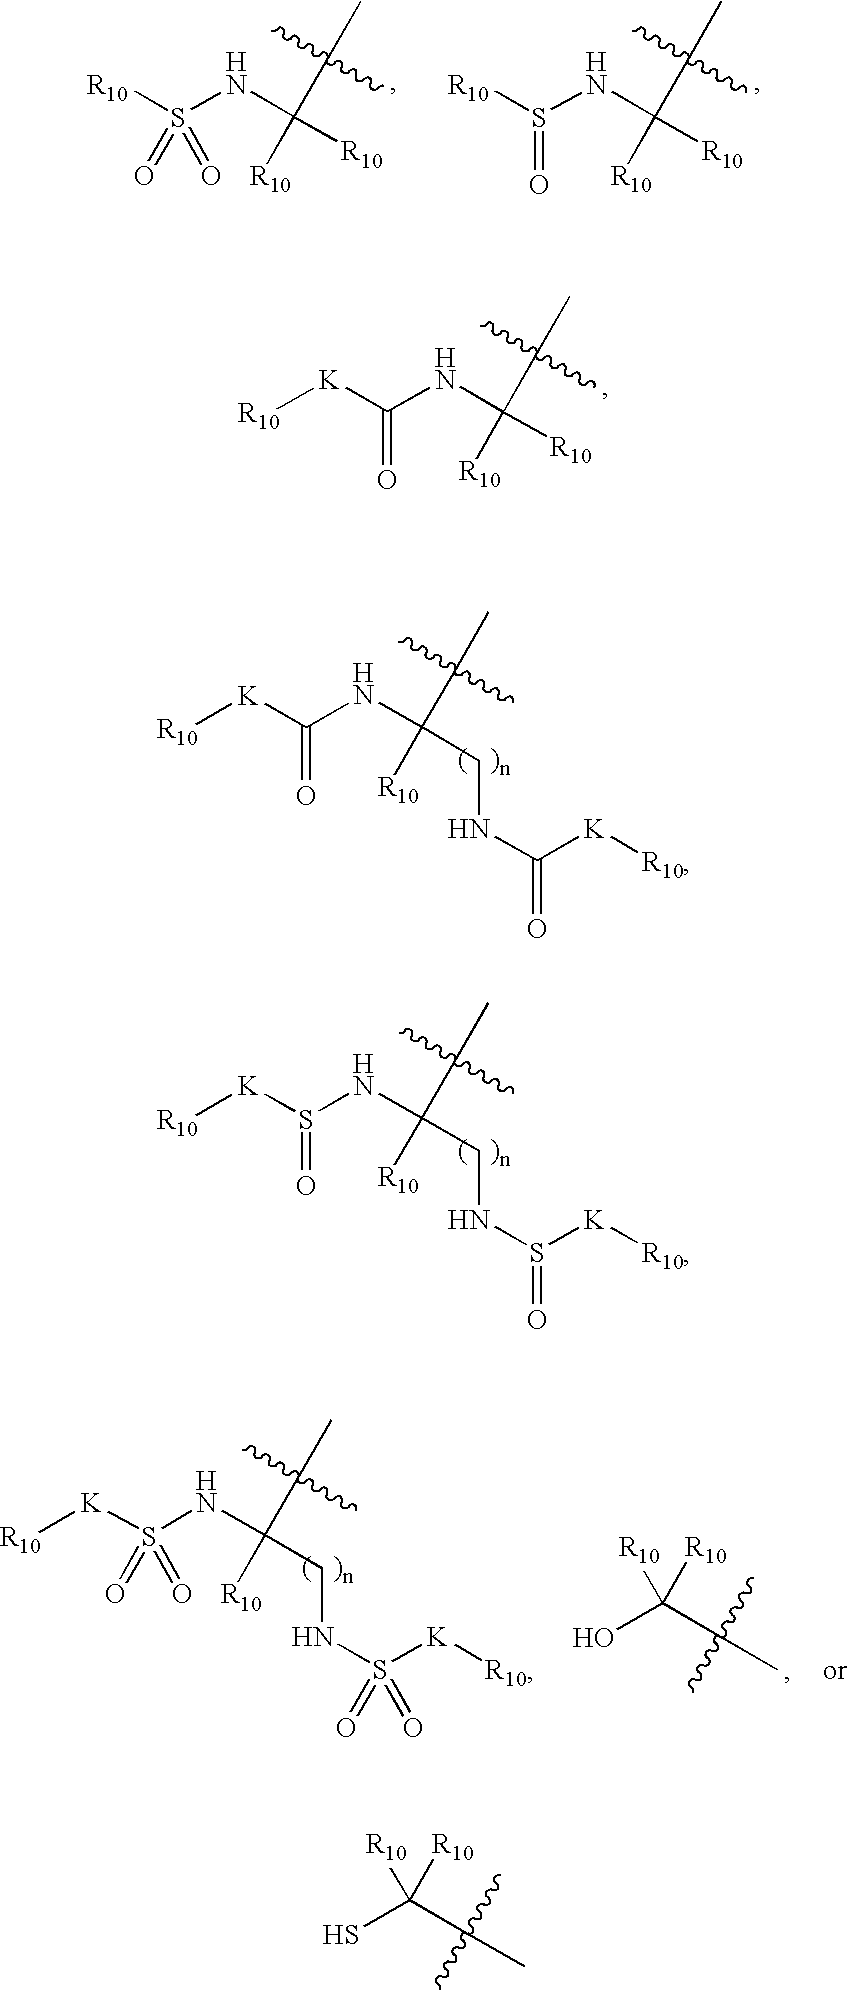 Inhibitors of serine proteases, particular HCV NS3-NS4A protease